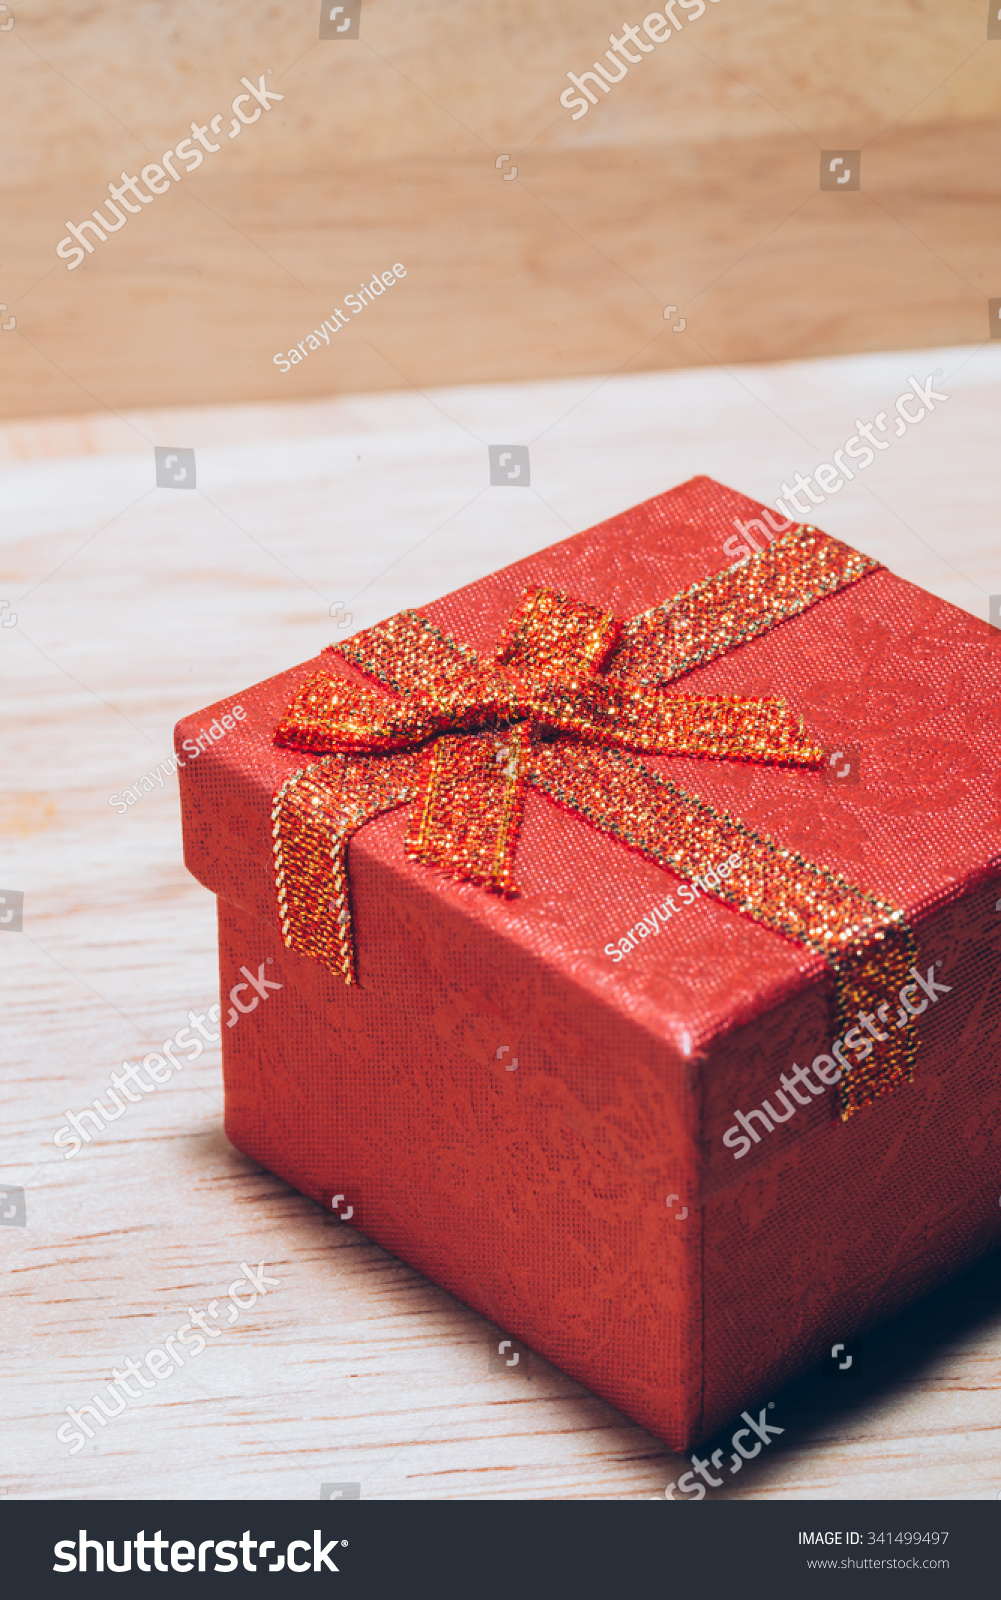 Christmas gift red box on wooden background #341499497